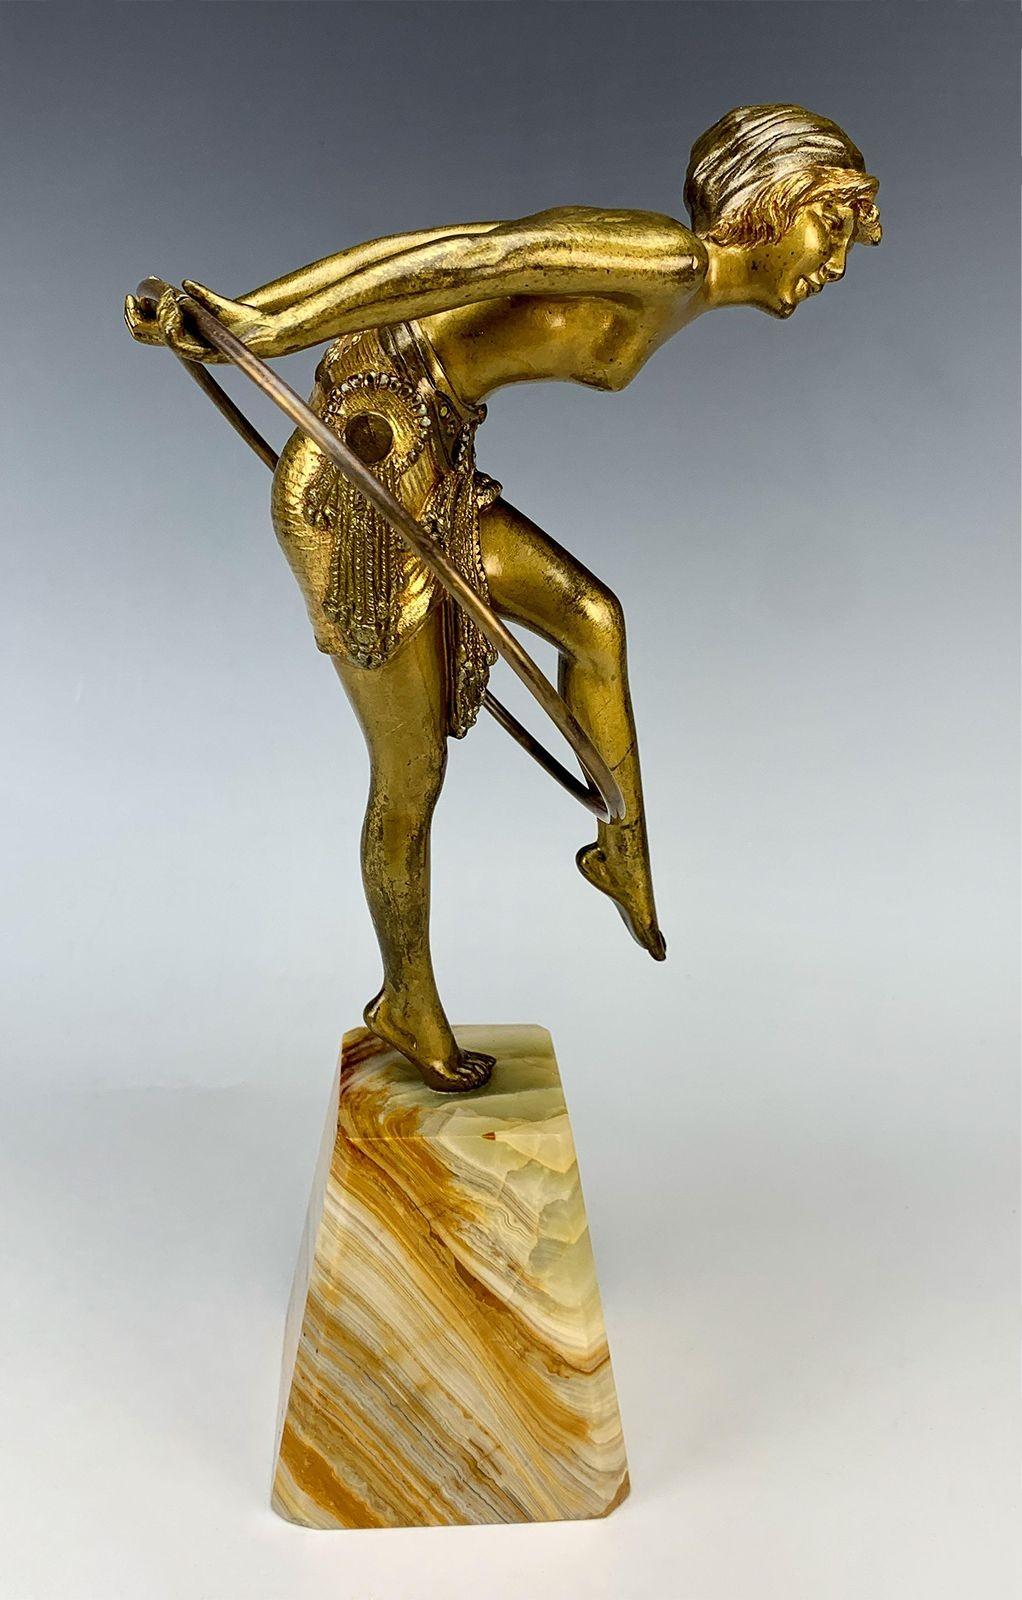 French Hoop Dancer Gilt Bronze Sculpture on Onyx Base by D.H. Chiparus, c. 1920 For Sale